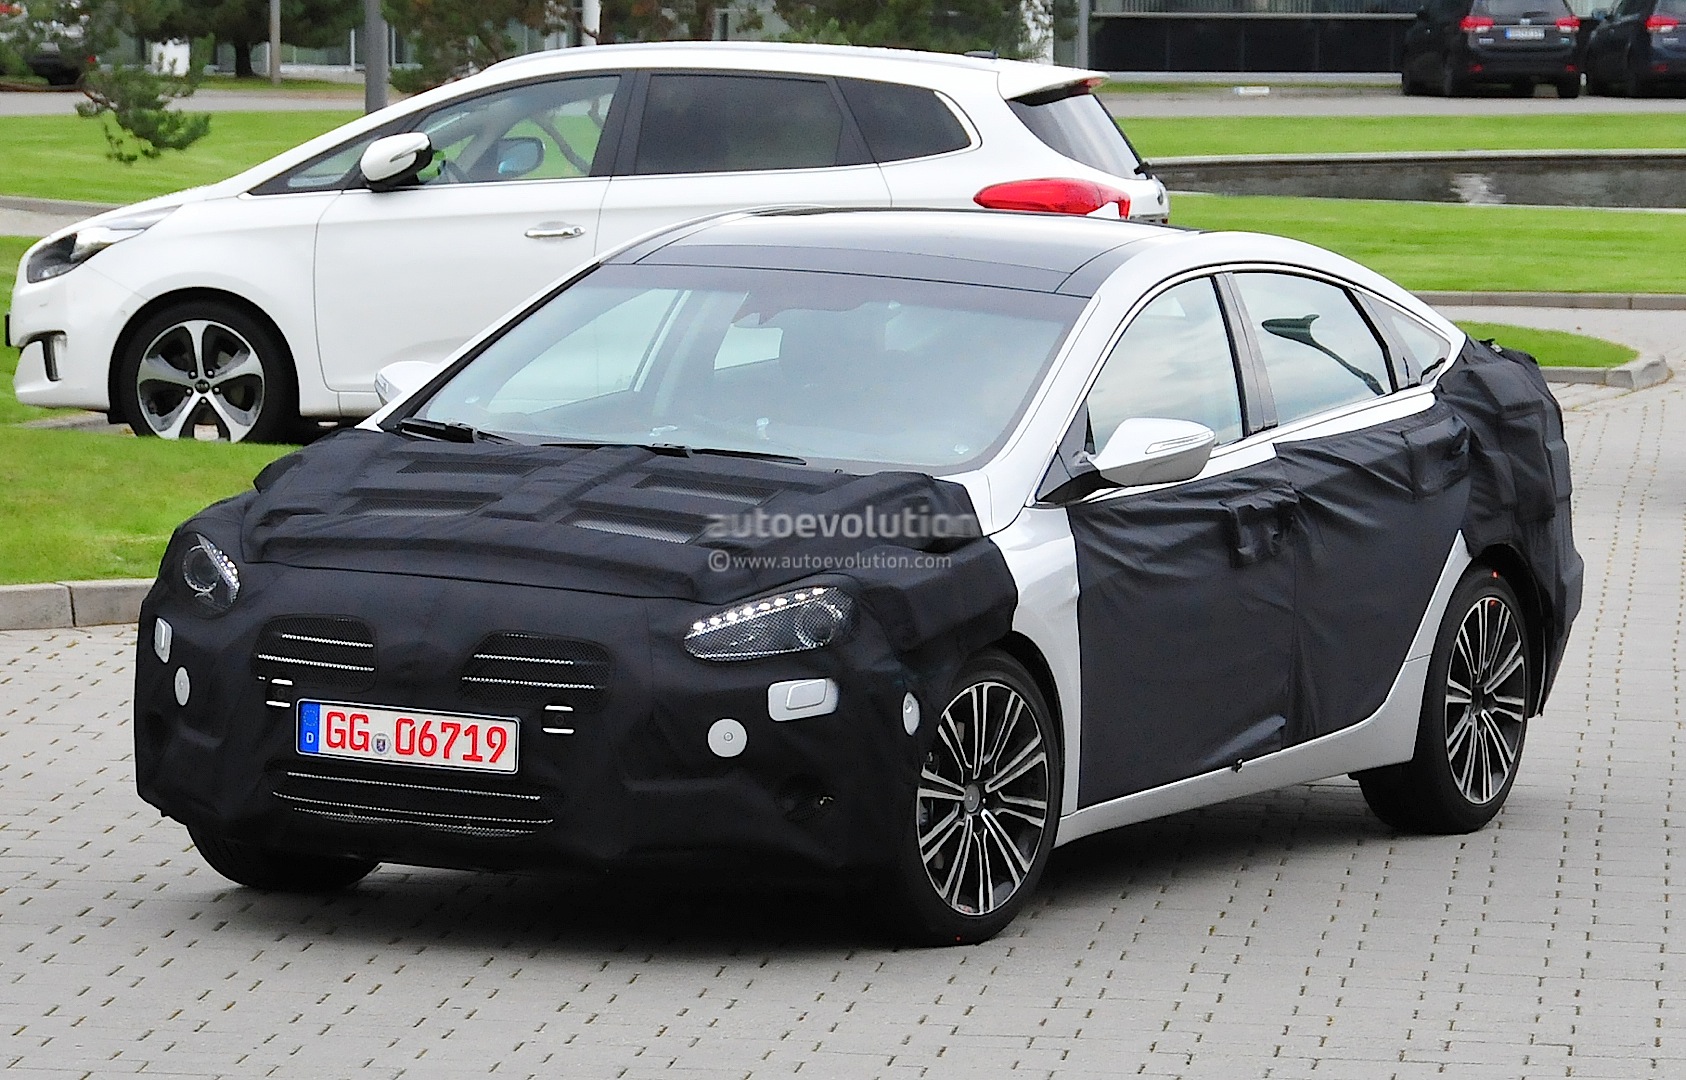 hyundai-i40-facelift-looks-snazzy-photo-gallery_3